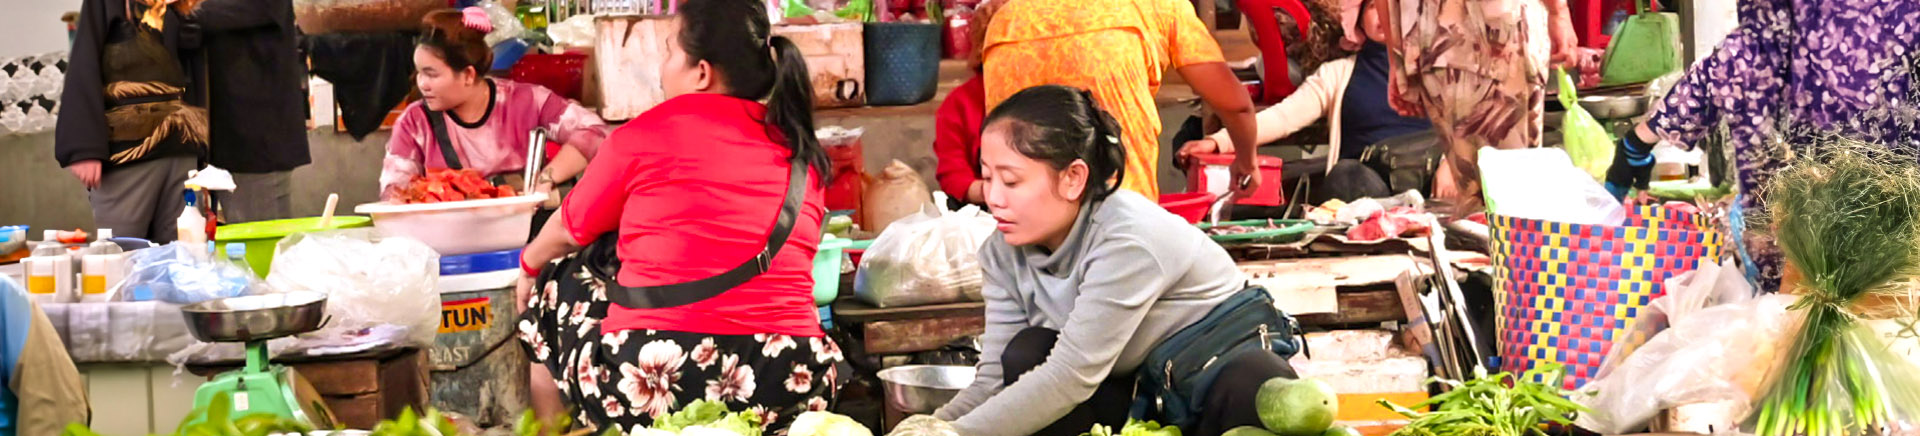 Women working at busy market.